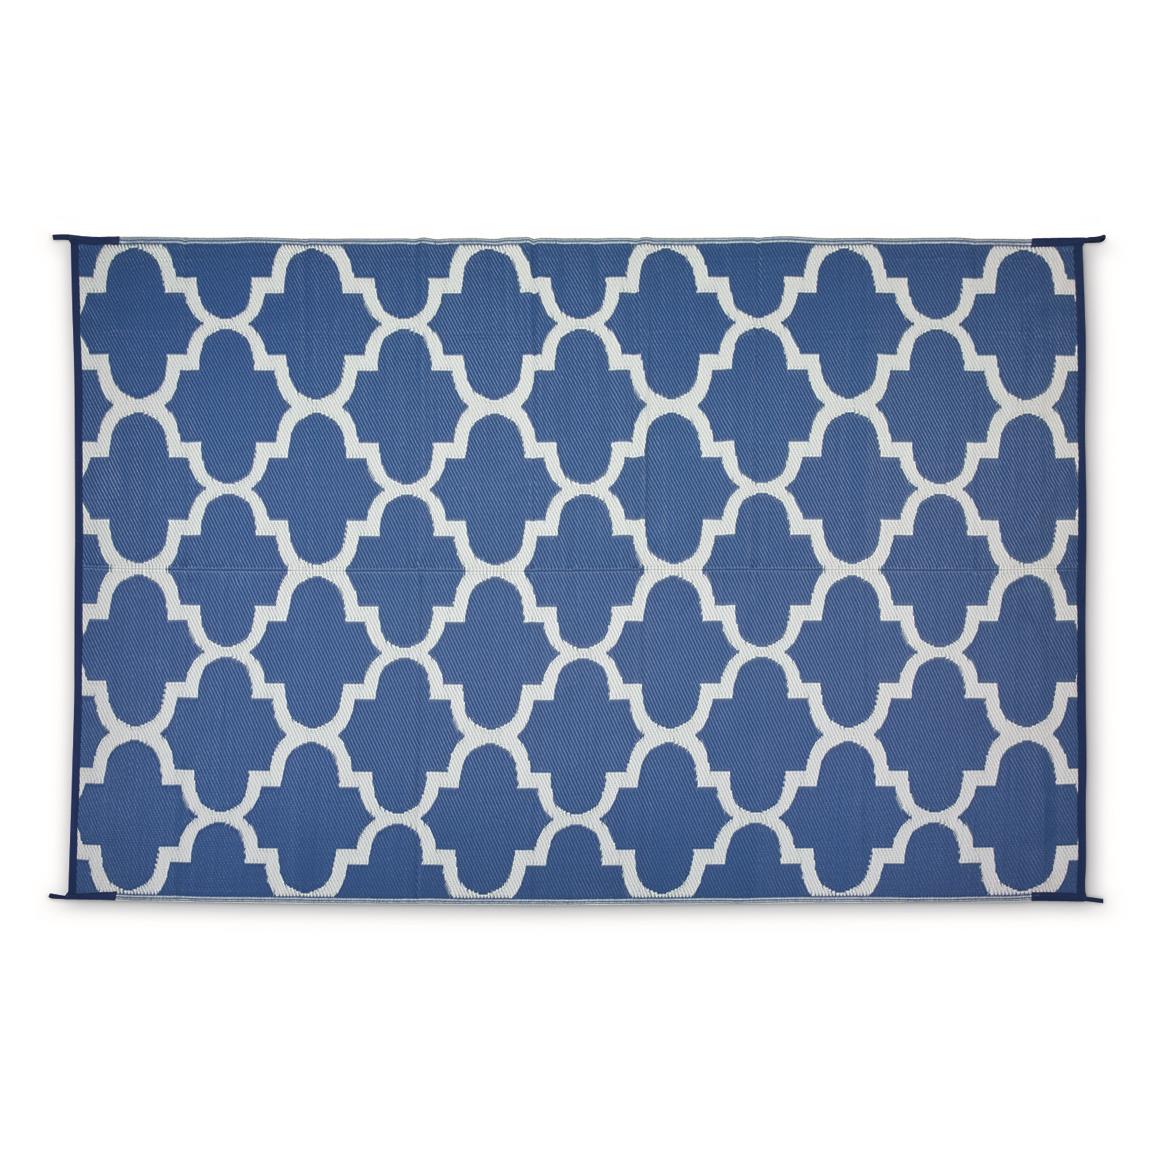 Guide Gear Moroccan Outdoor Rug, Blue/white